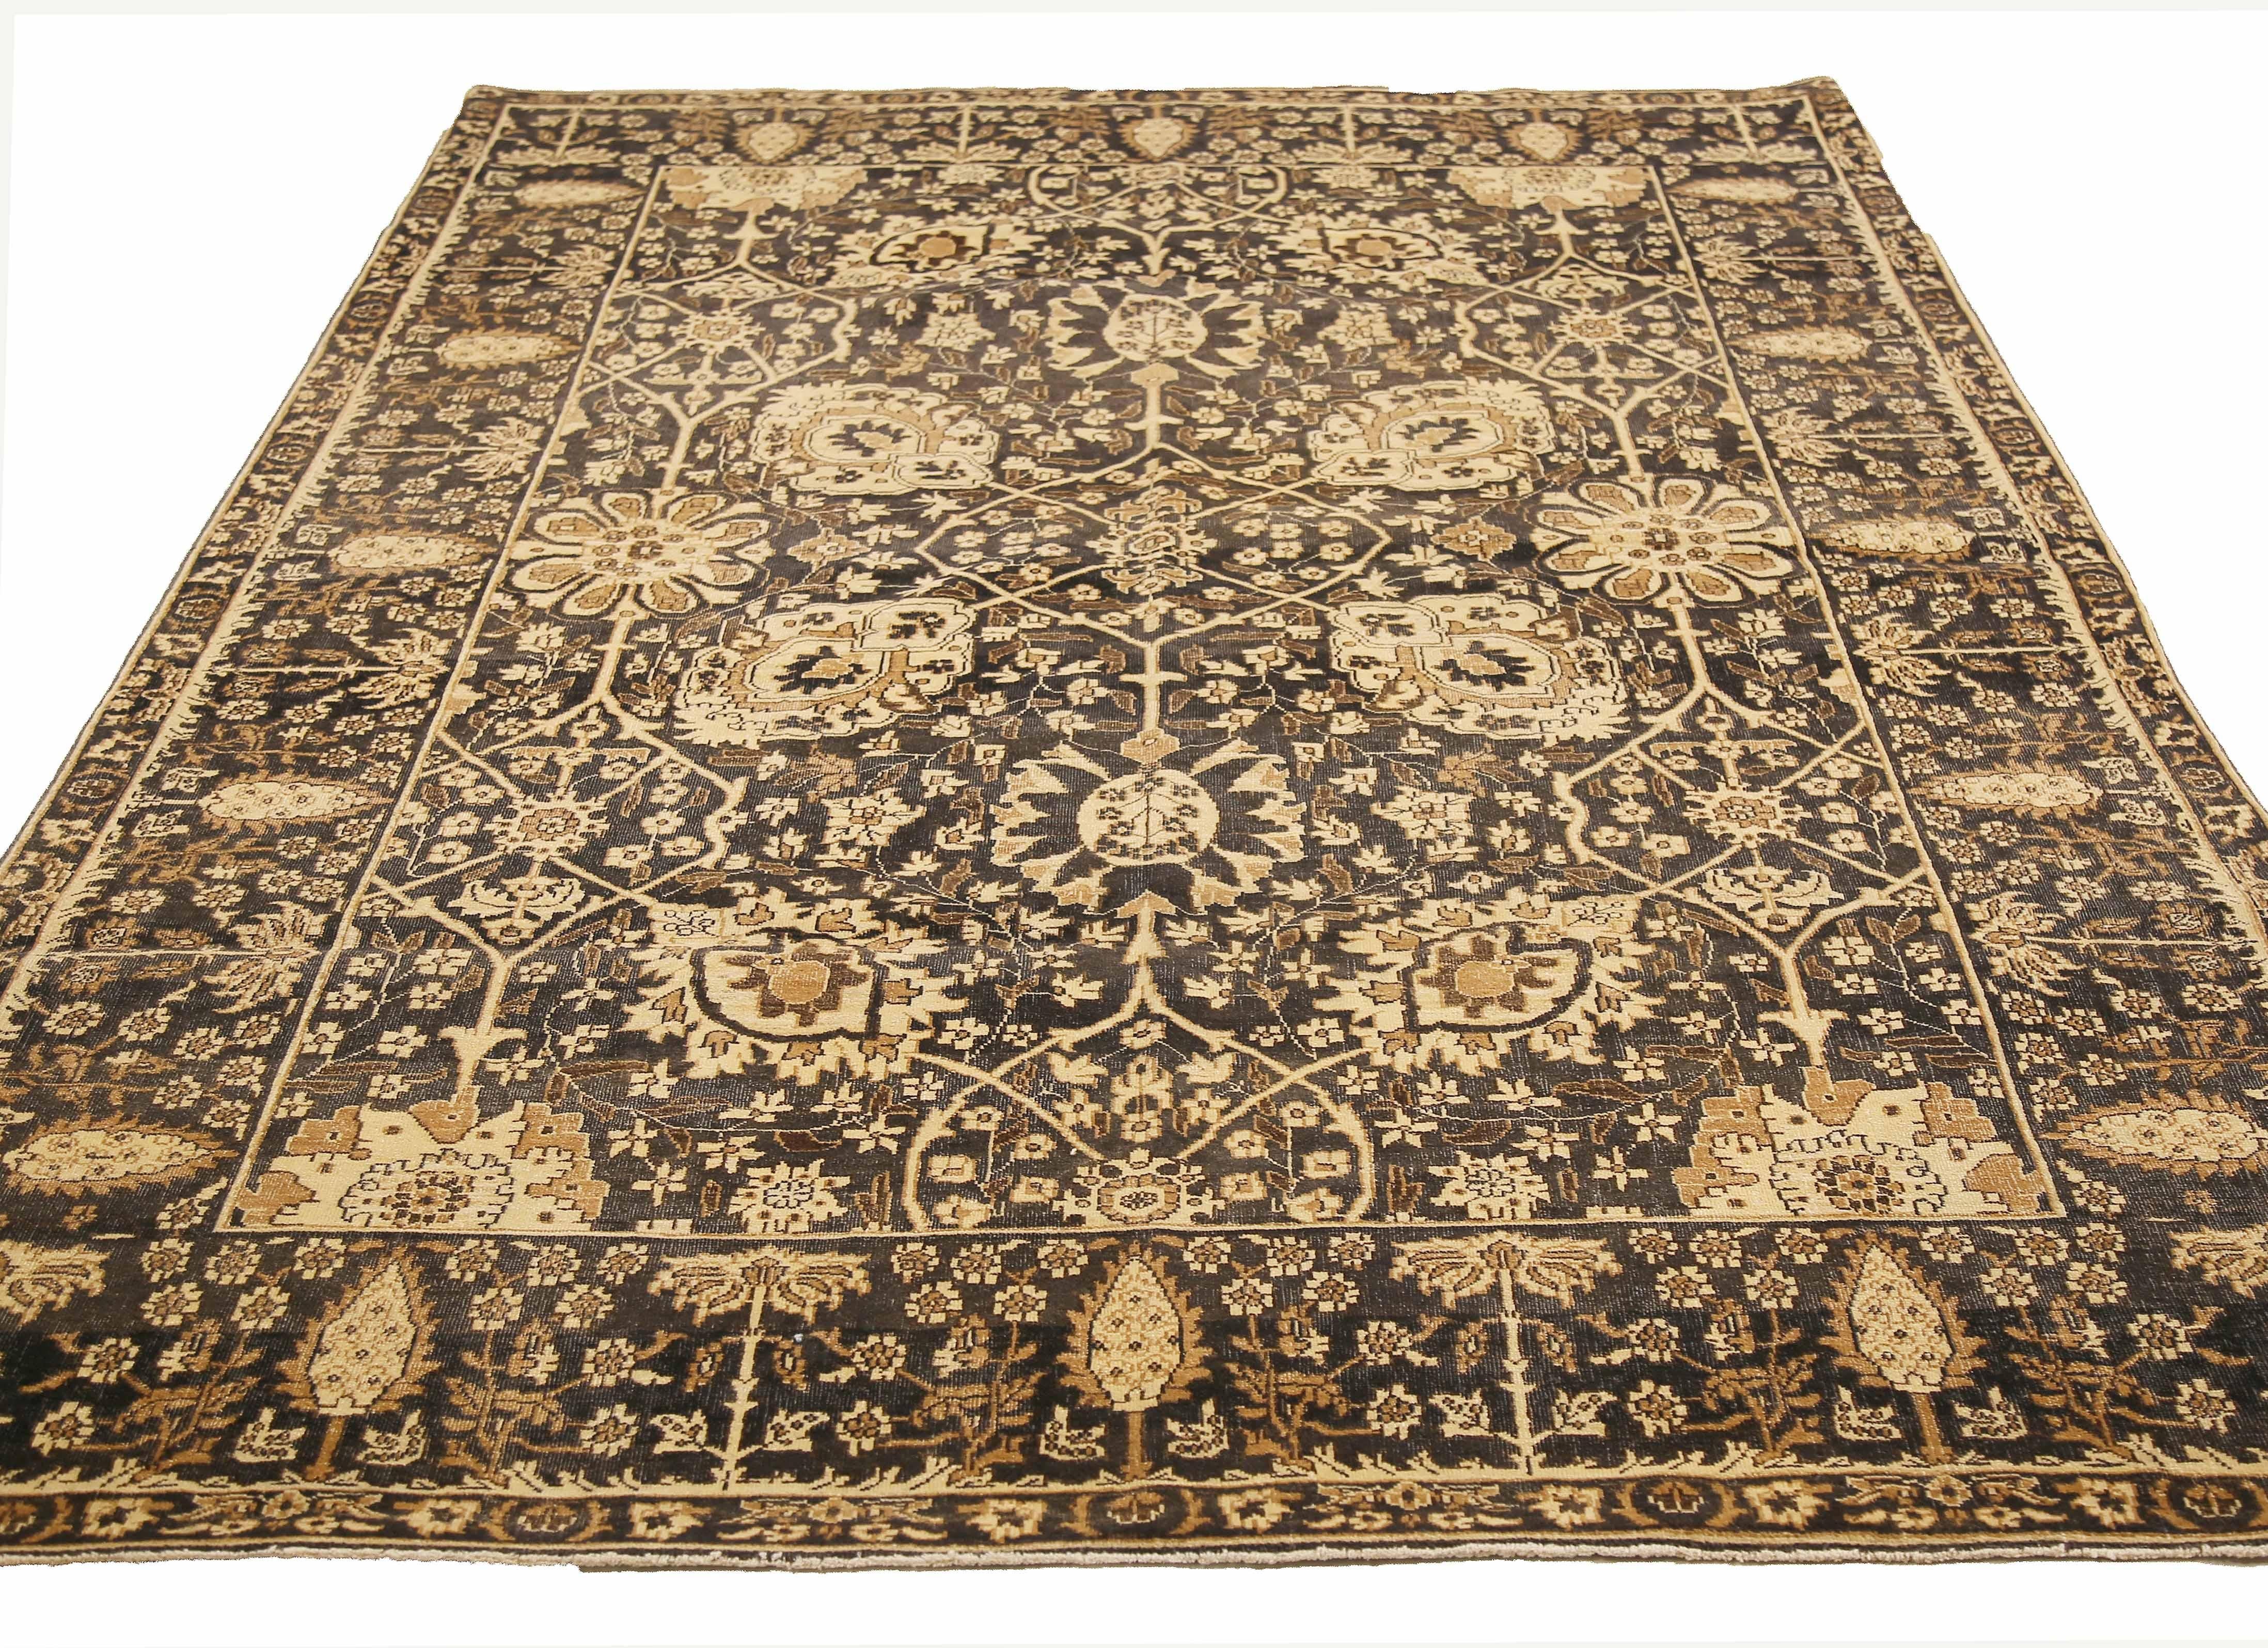 Contemporary Turkish rug handwoven from the finest sheep’s wool and colored with all-natural vegetable dyes that are safe for humans and pets. It’s a traditional Tabriz weaving featuring a lovely ensemble of floral designs in brown and ivory over a